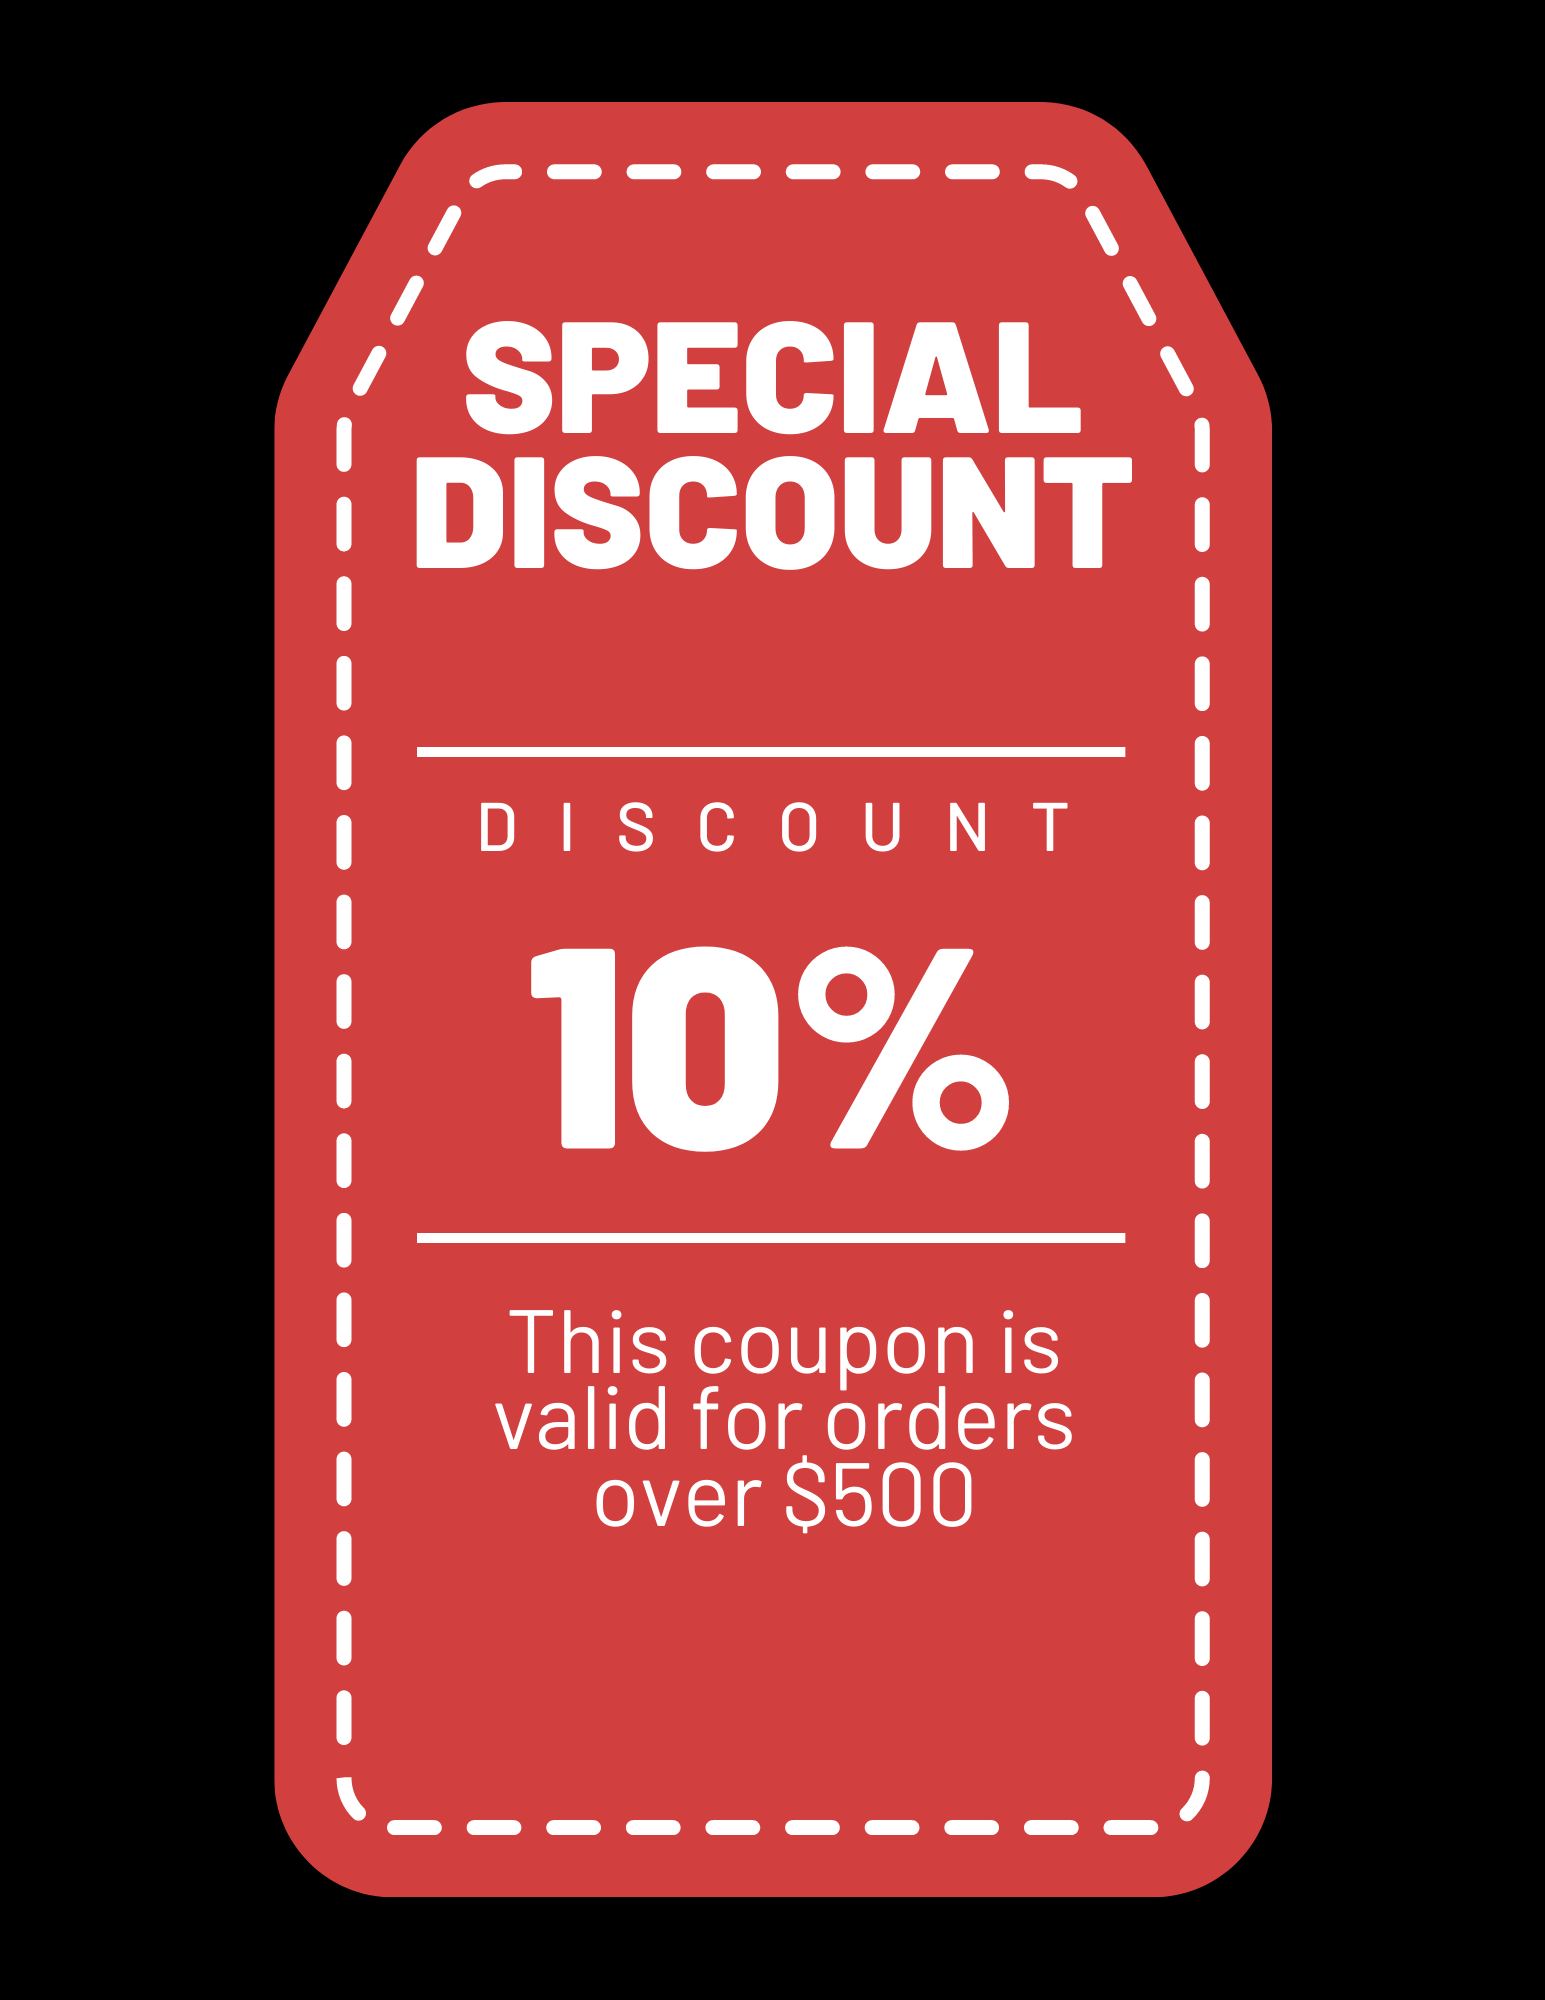 Discount of 10% on orders over $500